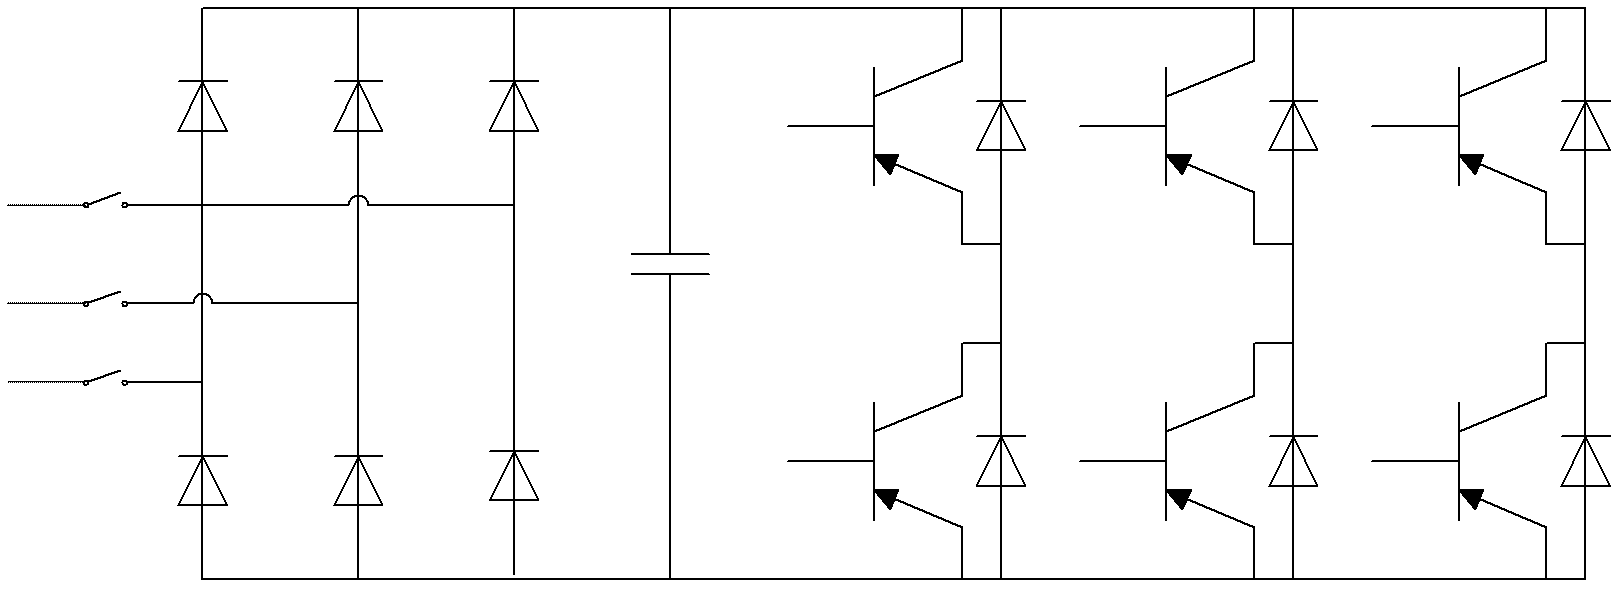 Two-way four-quadrant frequency converter